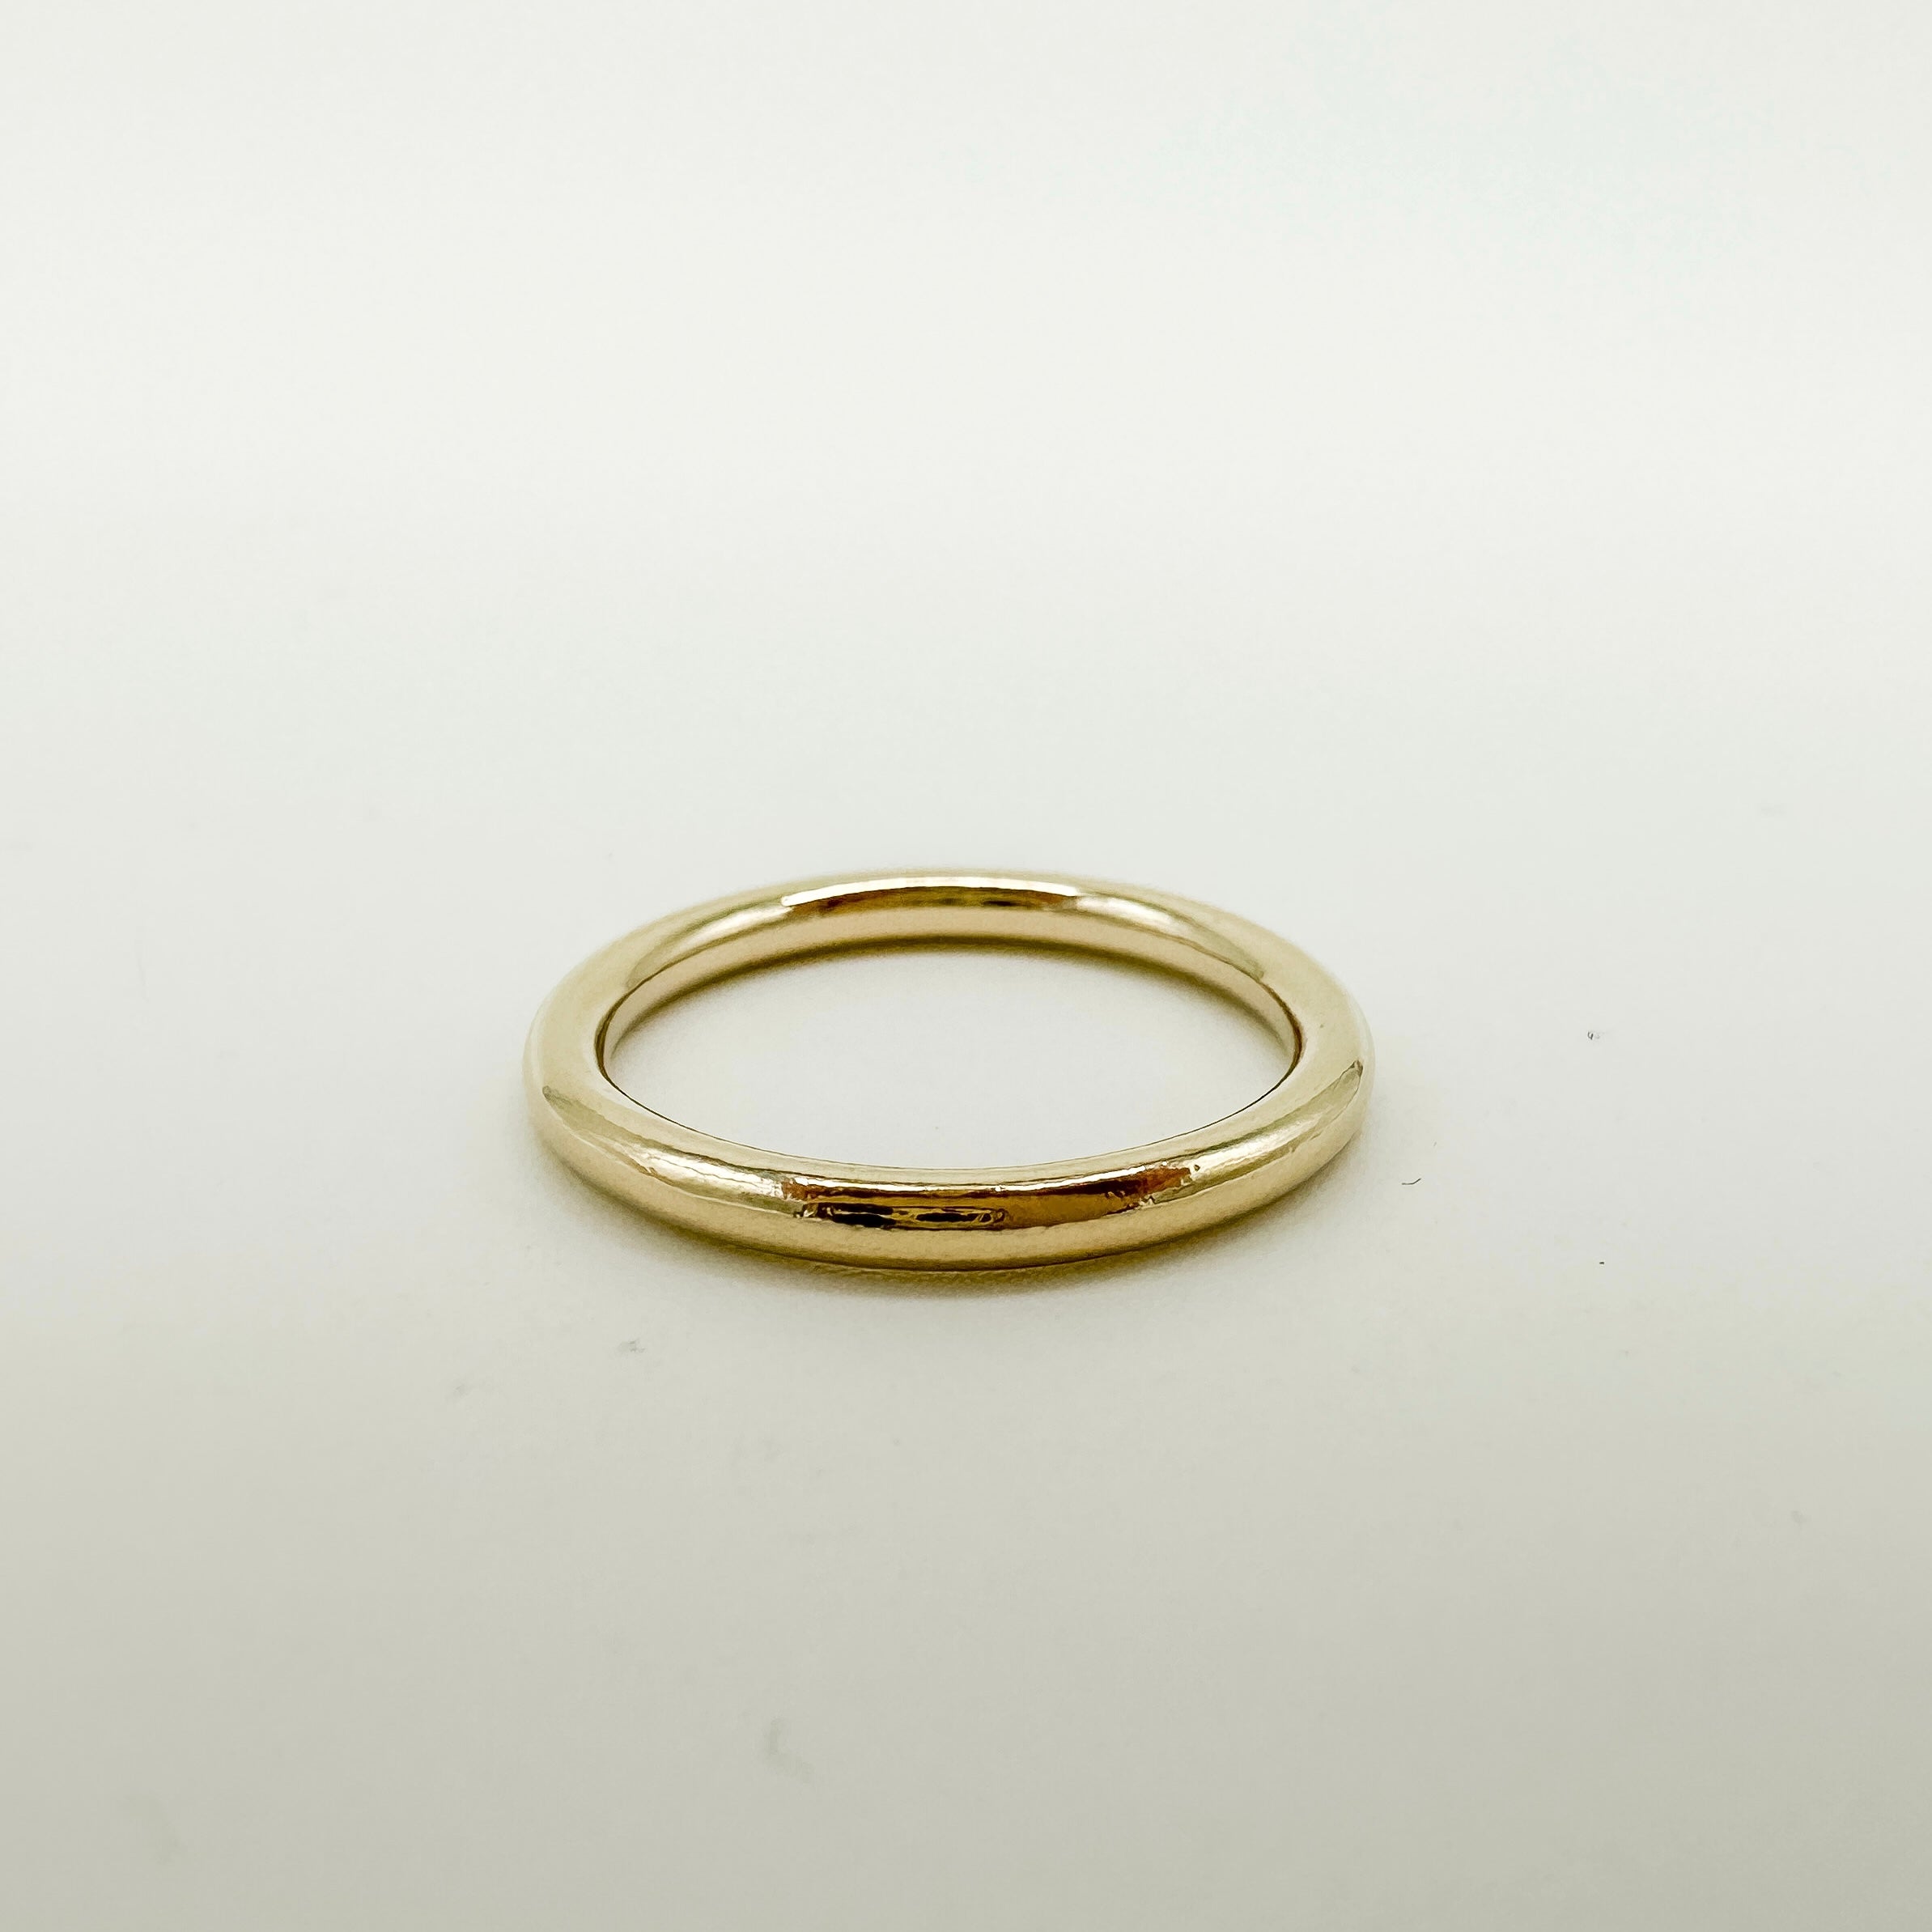 twisted rope ring, gold filled rope ring, rope ring, gold filled ring, stacking ring, wholesale rings, wholesale gold filled rings